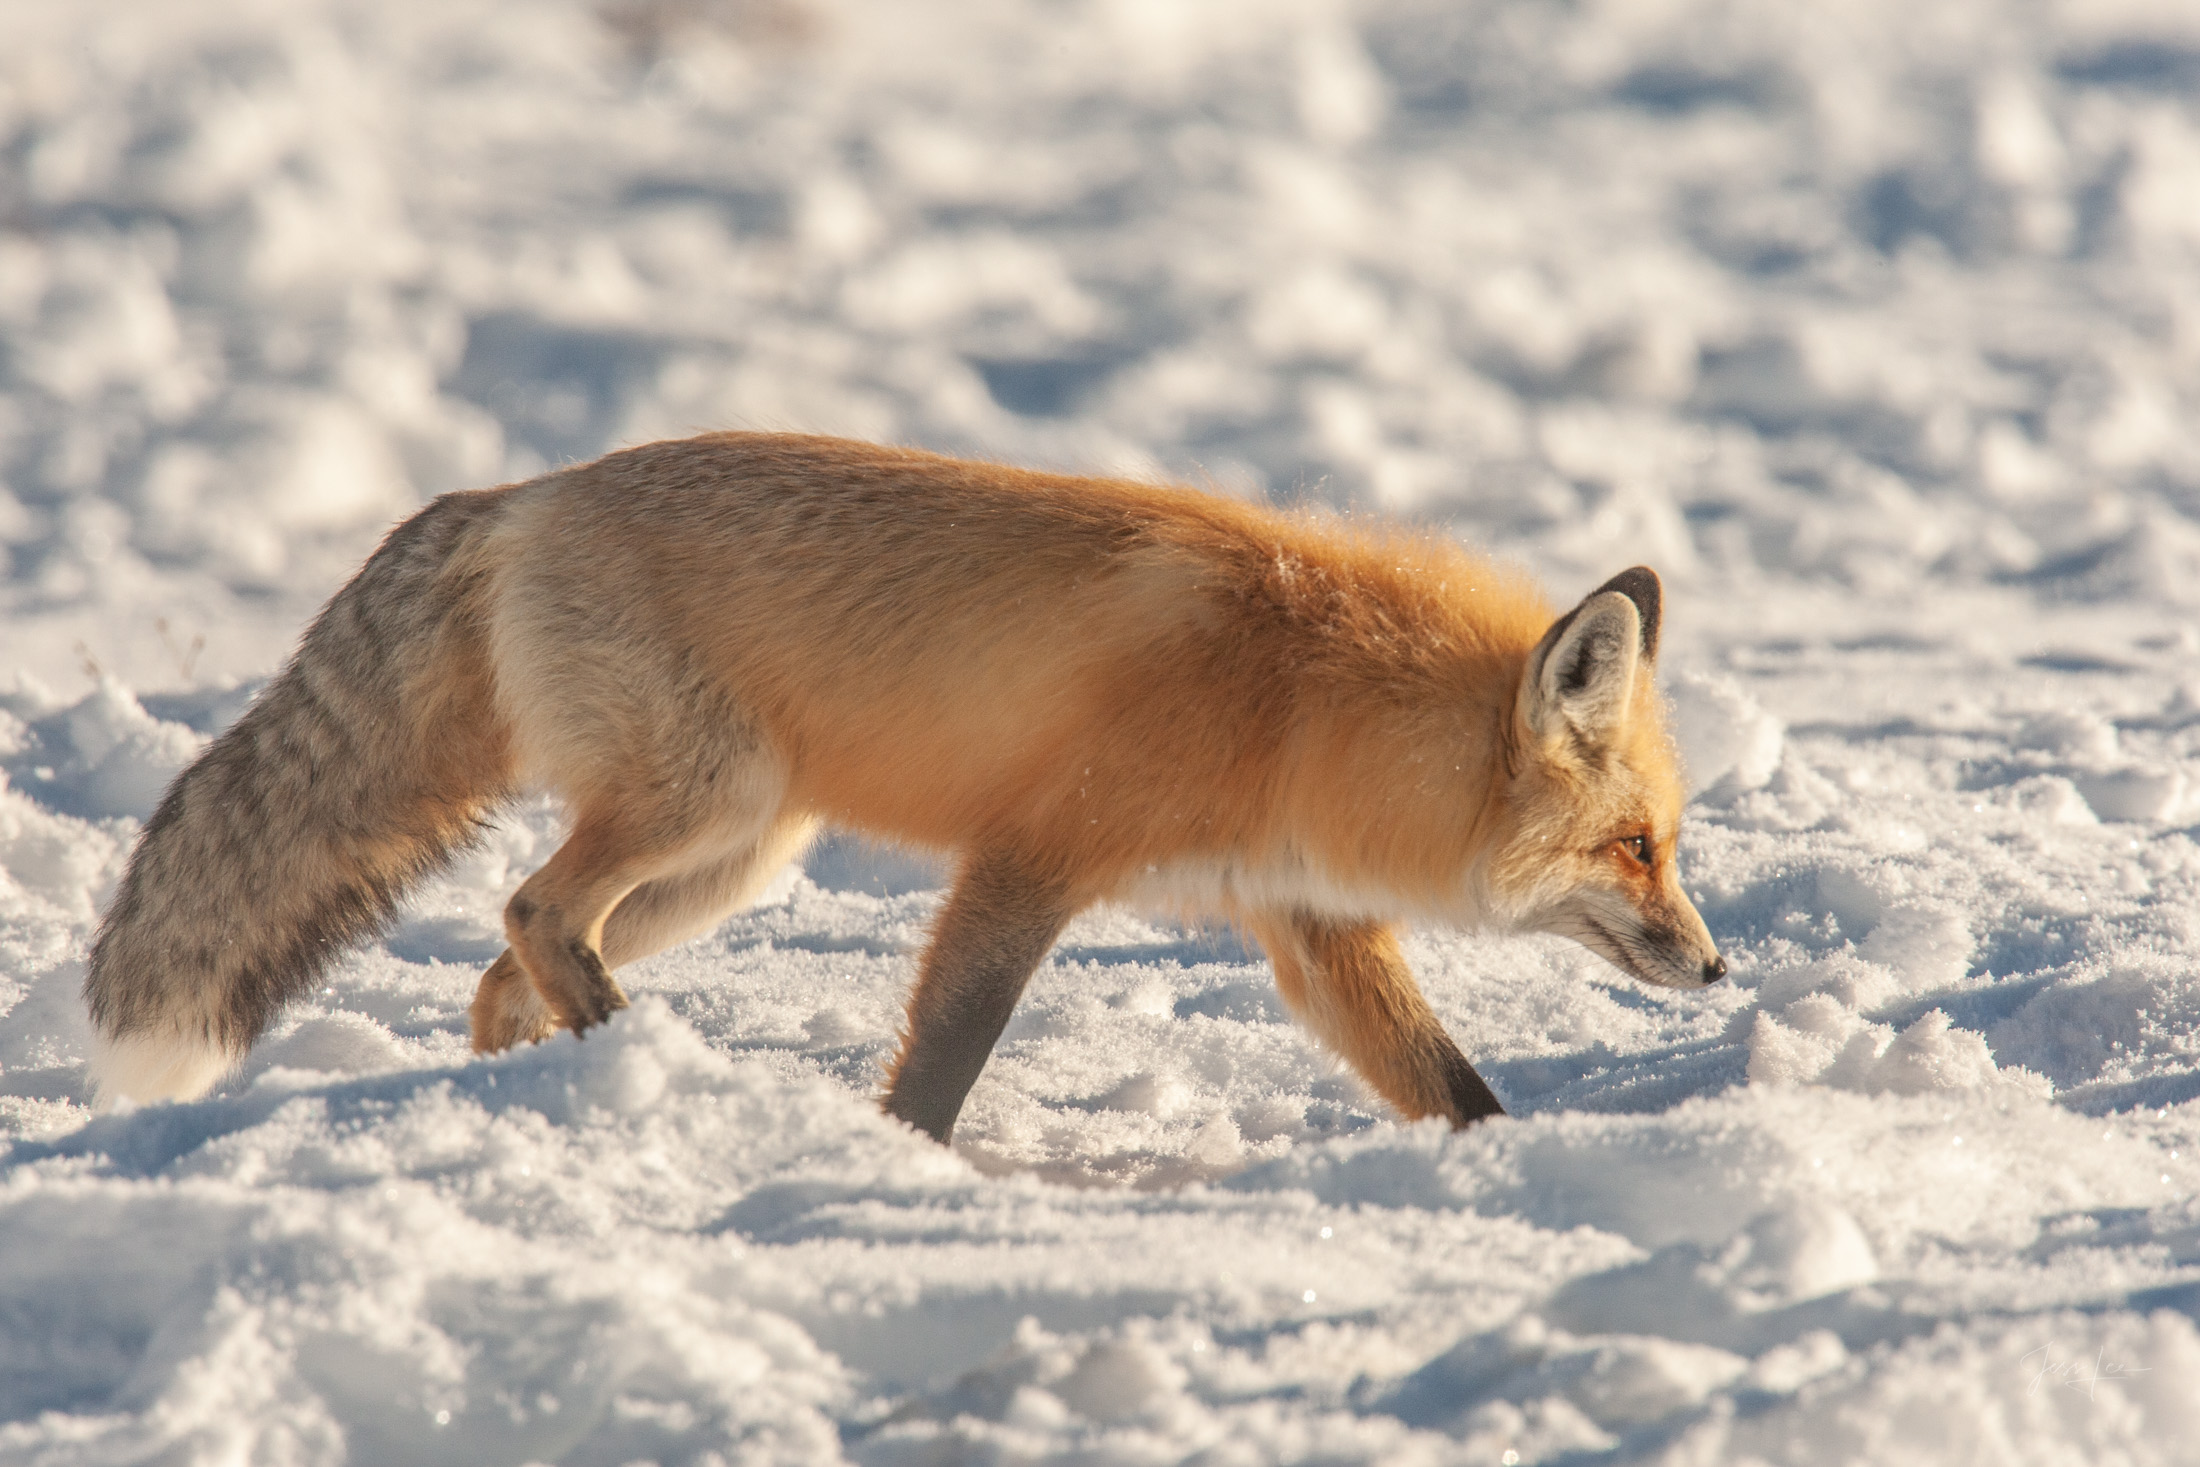 Fox-photo-15 is a Limited Edition Fine Art Fox Photography Print of 250 prints